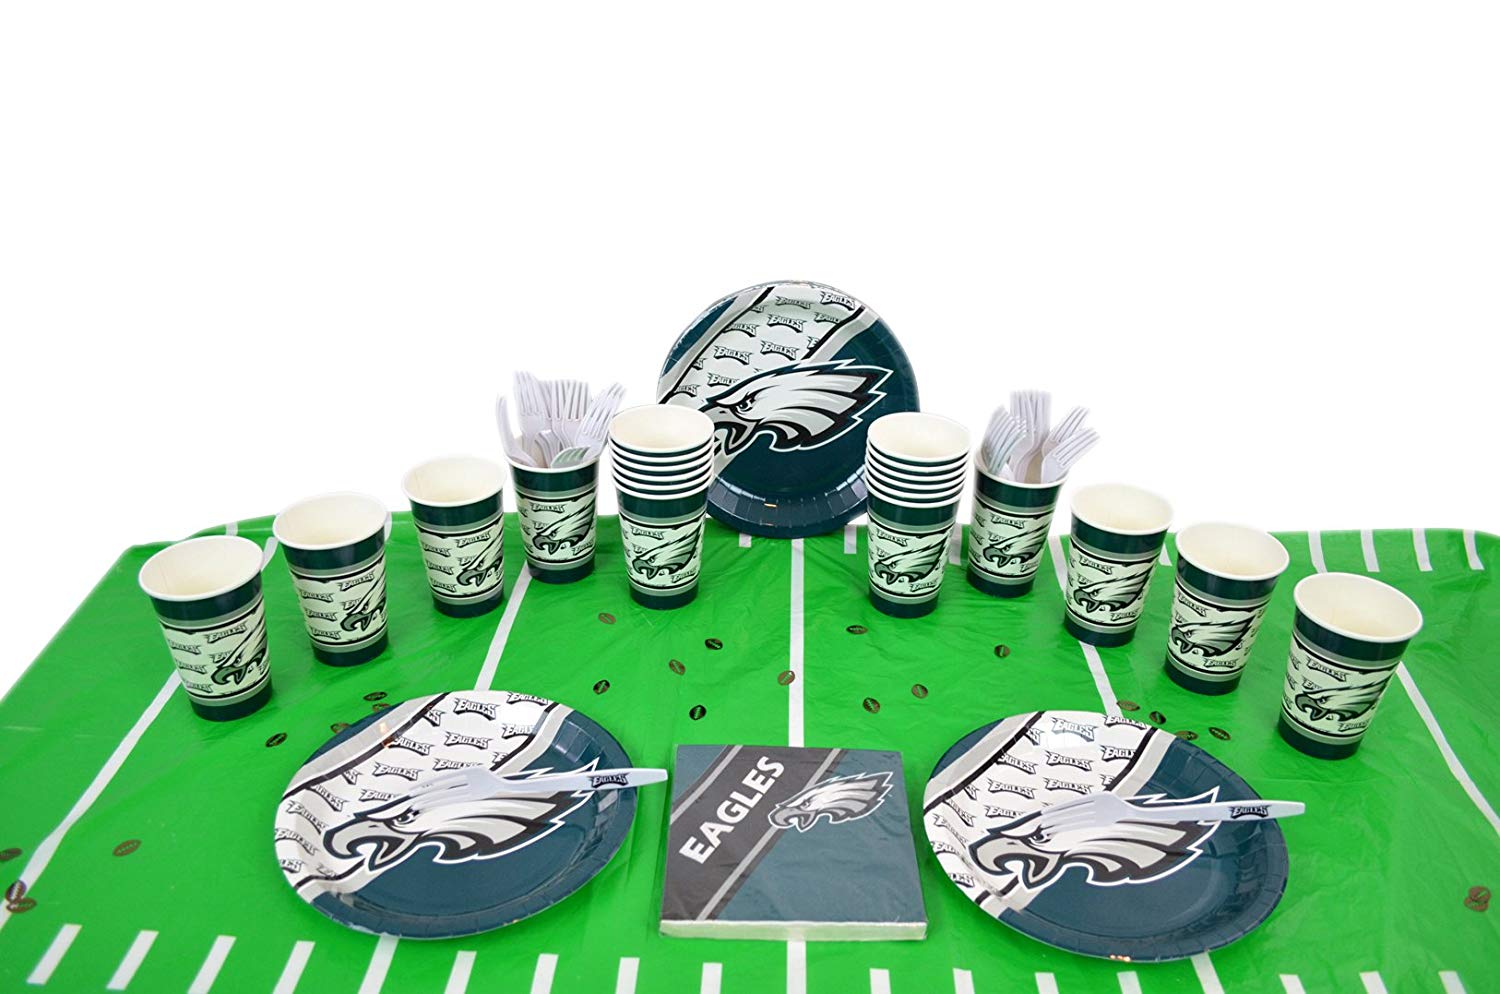 Duck House Official National Football Fan Shop Authentic NFL Tailgate Party Kit Bundle for 20 Fans - Table Setting and More